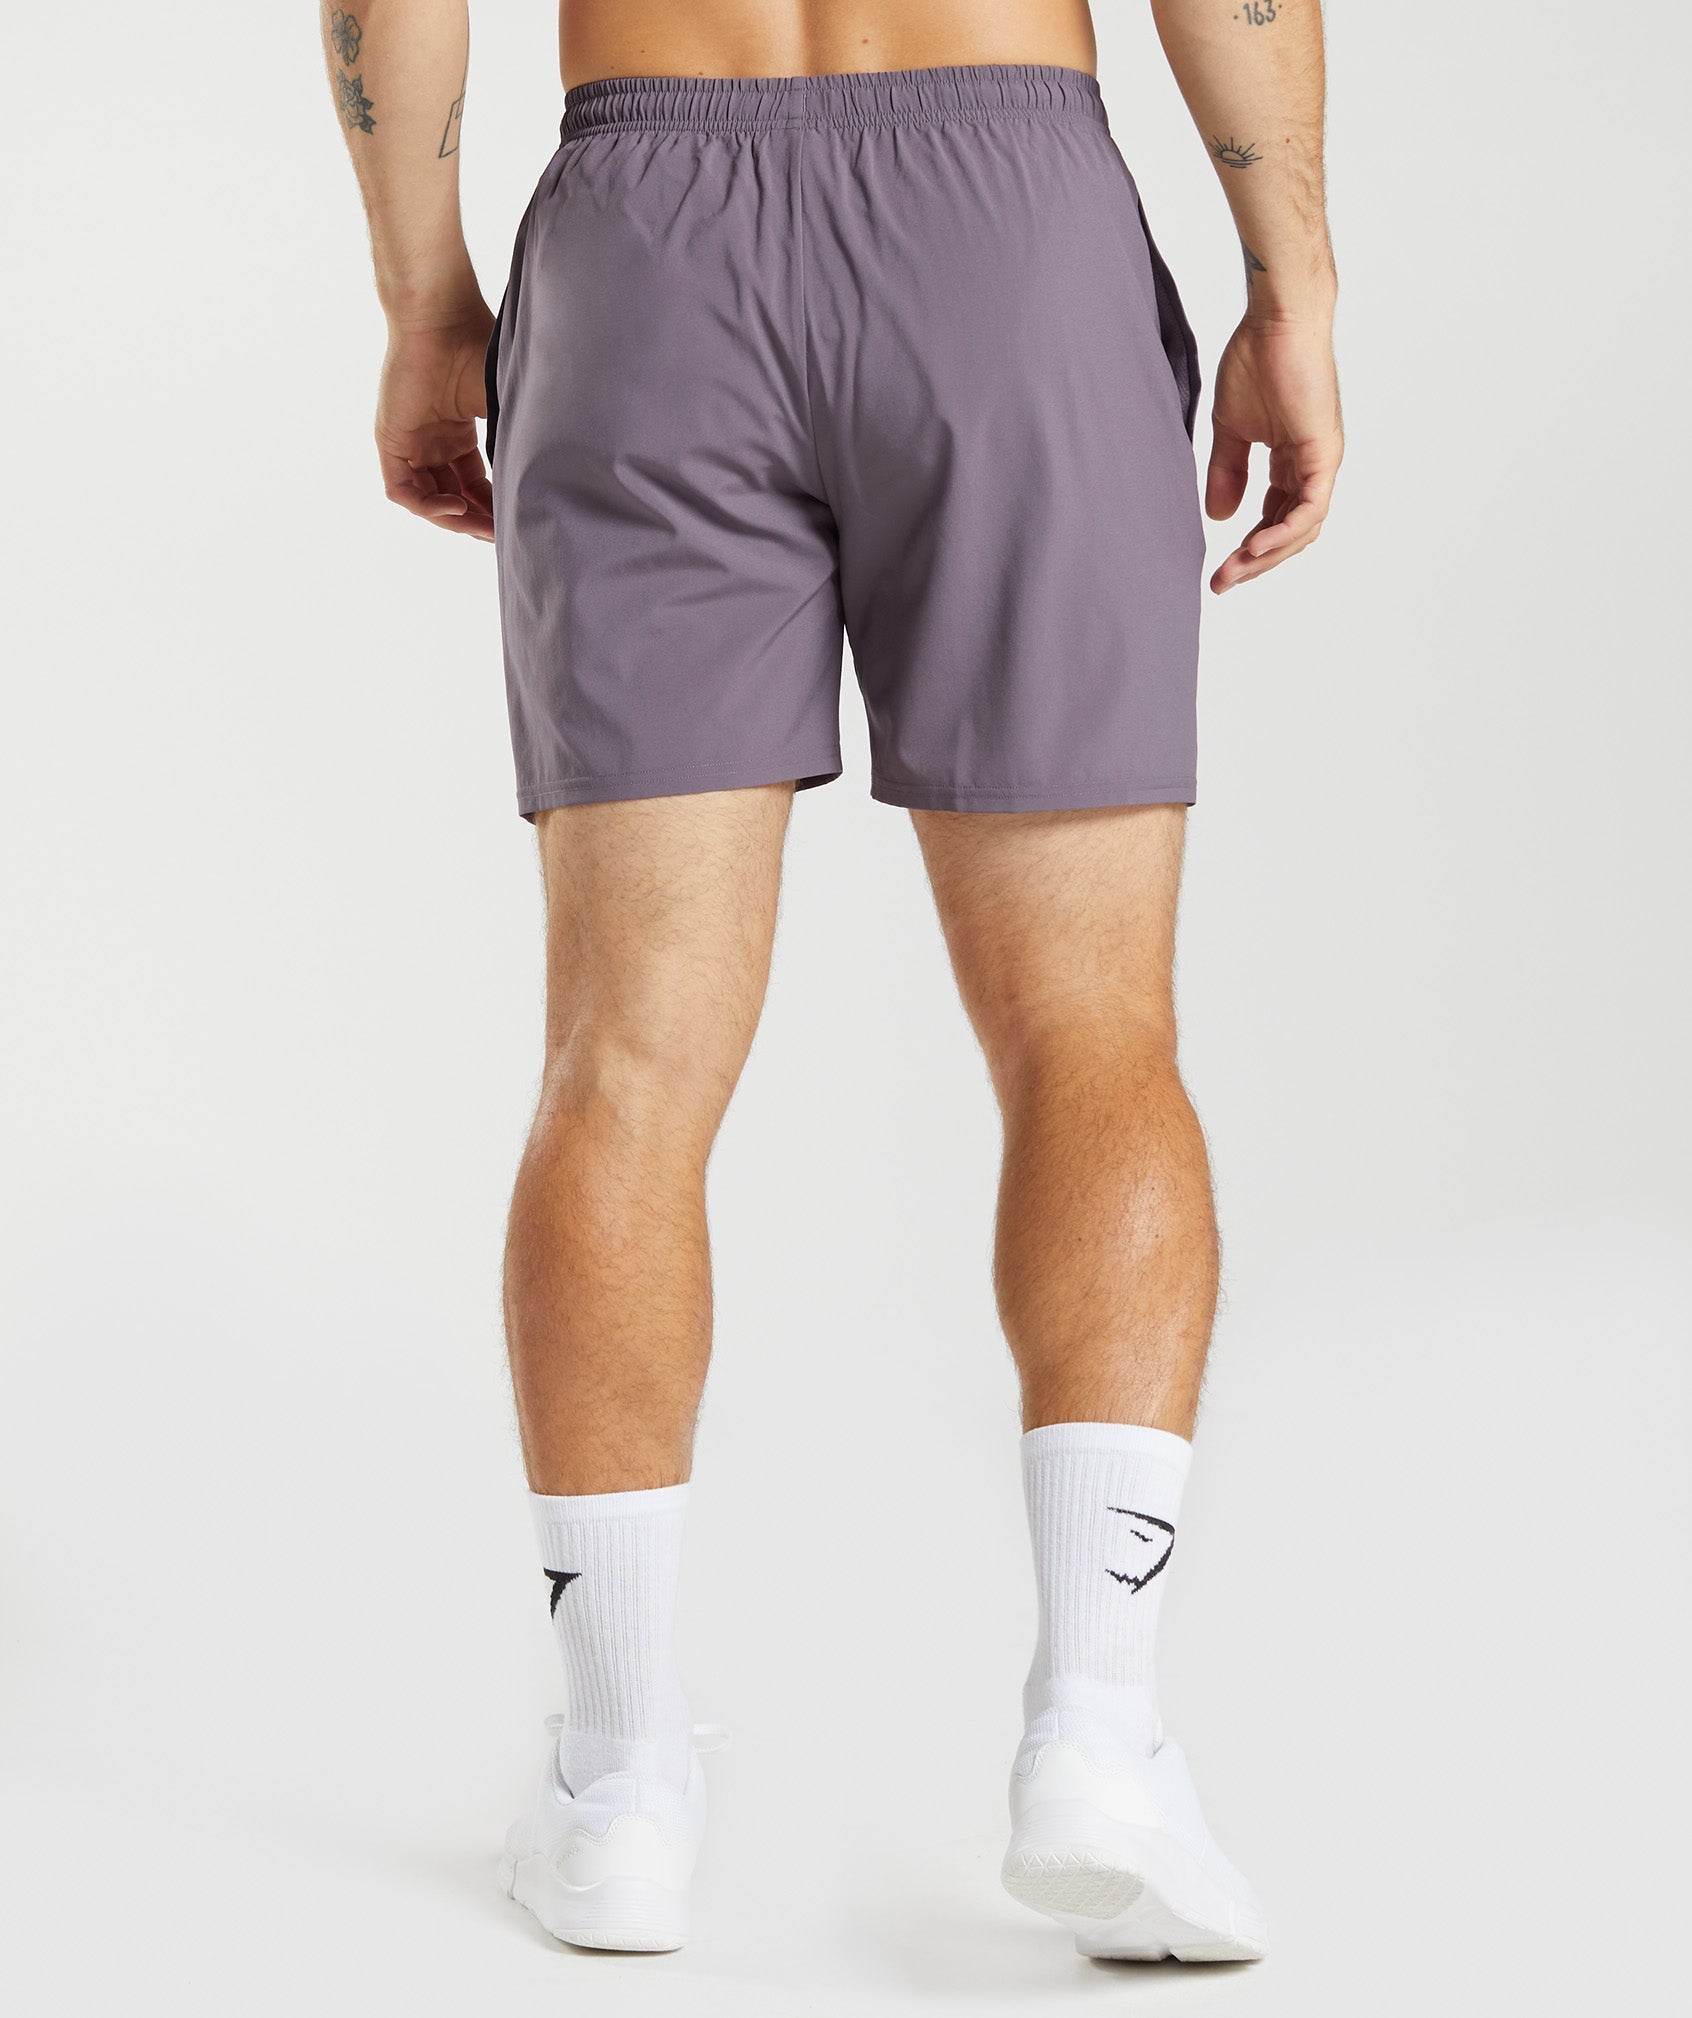 Arrival 7" Shorts in Musk Lilac